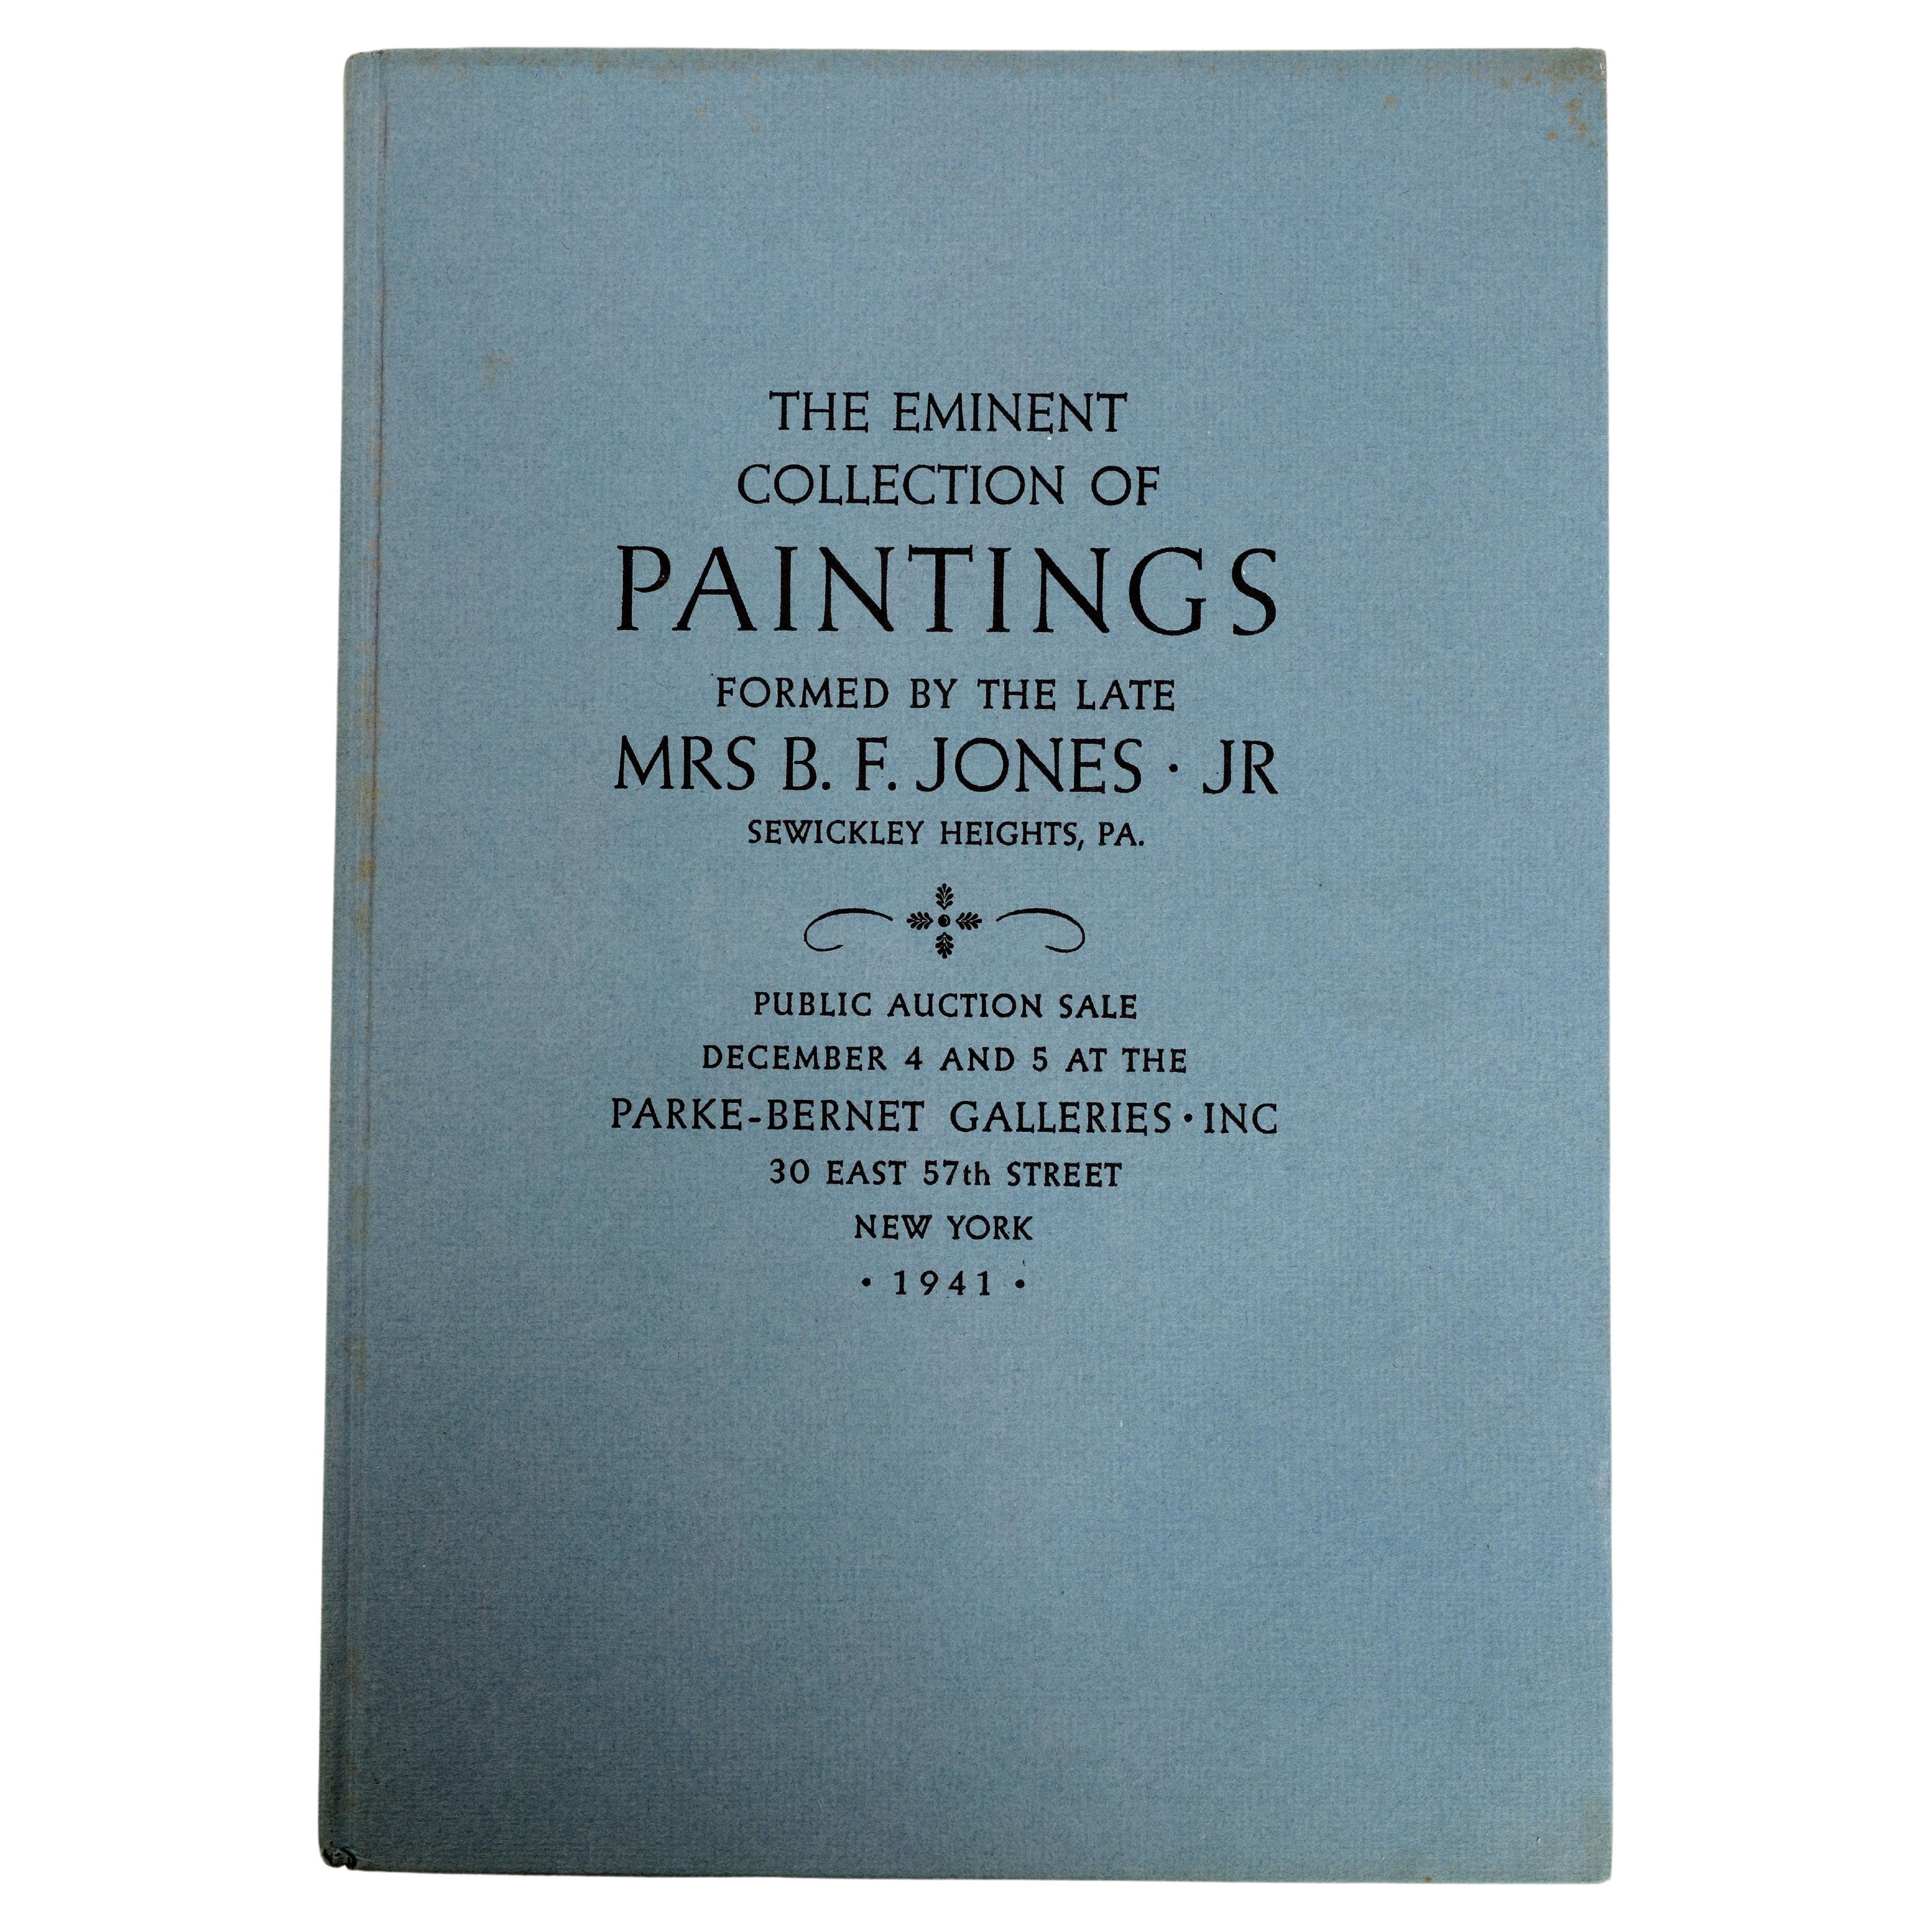 The Eminent Collection of Paintings Formed by the Late Mrs. B. F. Jones Jr